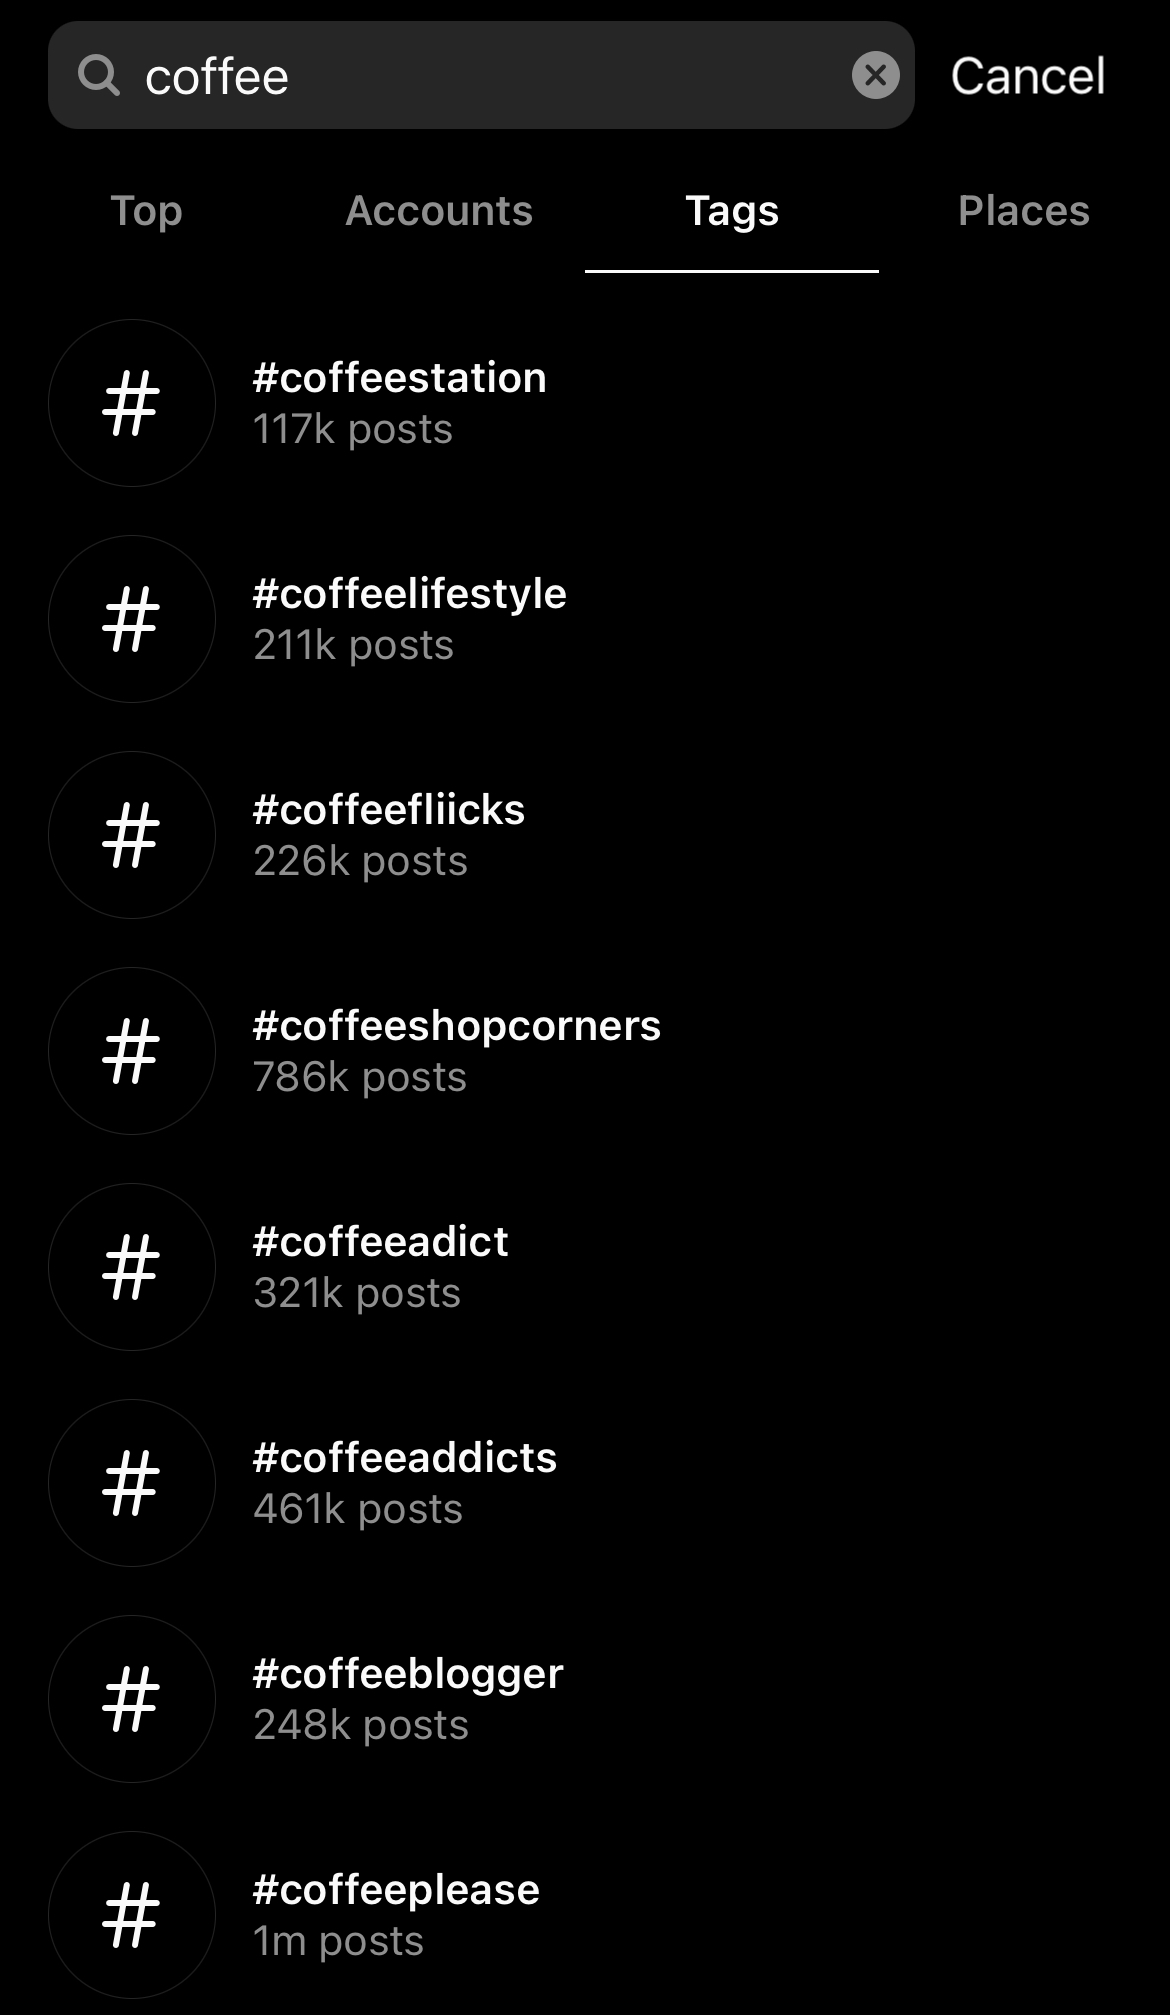 examples of related coffee hashtags